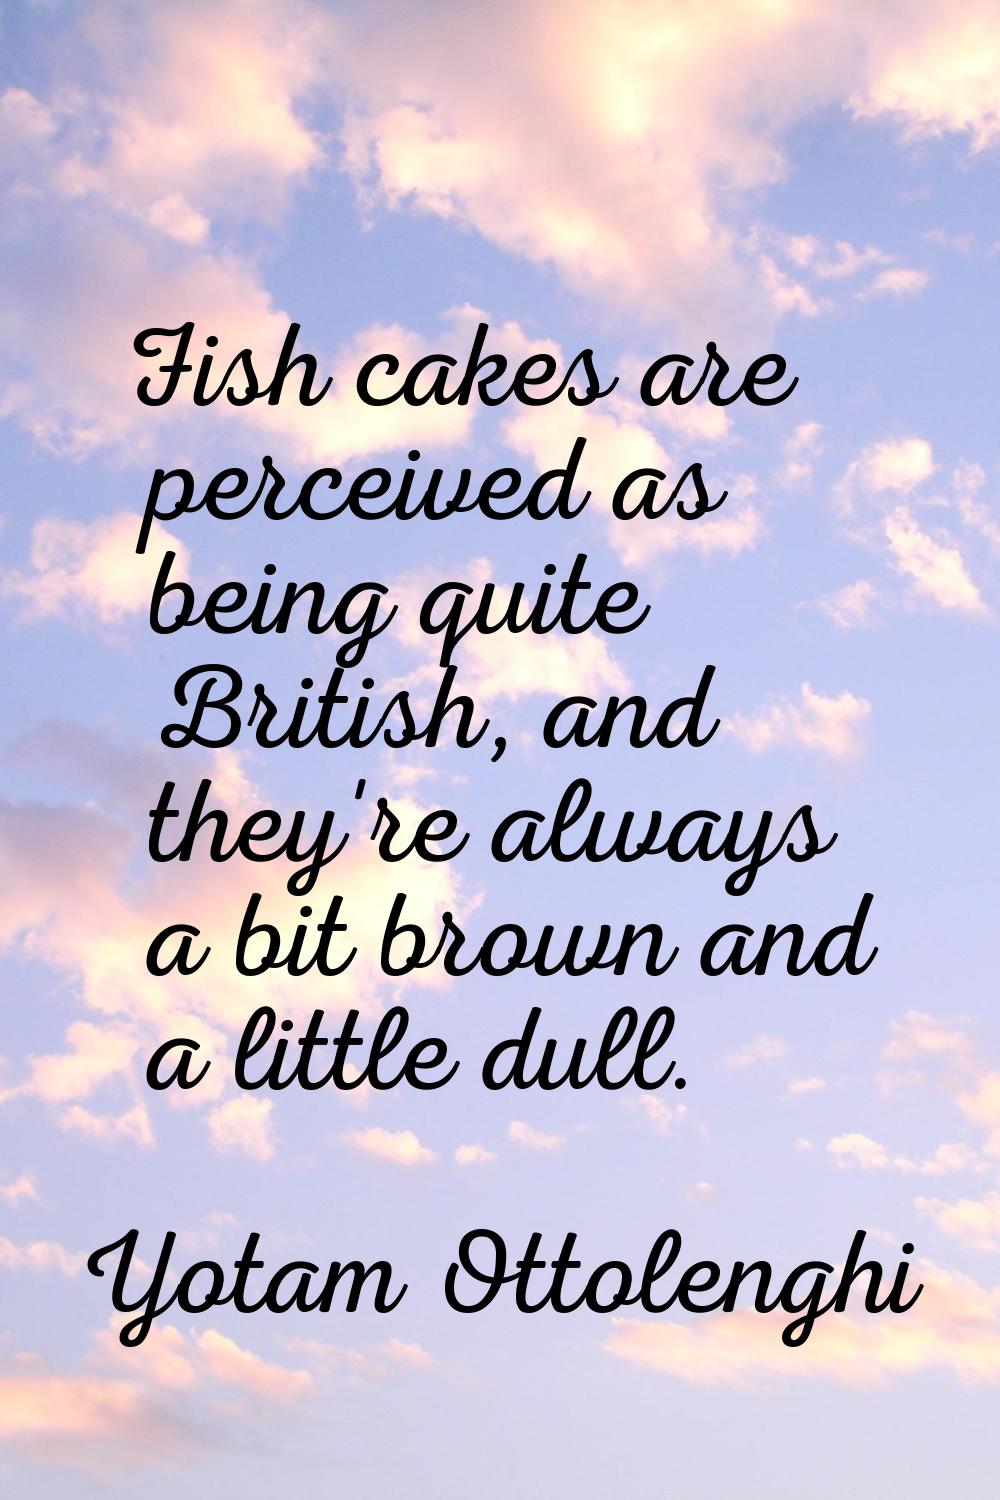 Fish cakes are perceived as being quite British, and they're always a bit brown and a little dull.